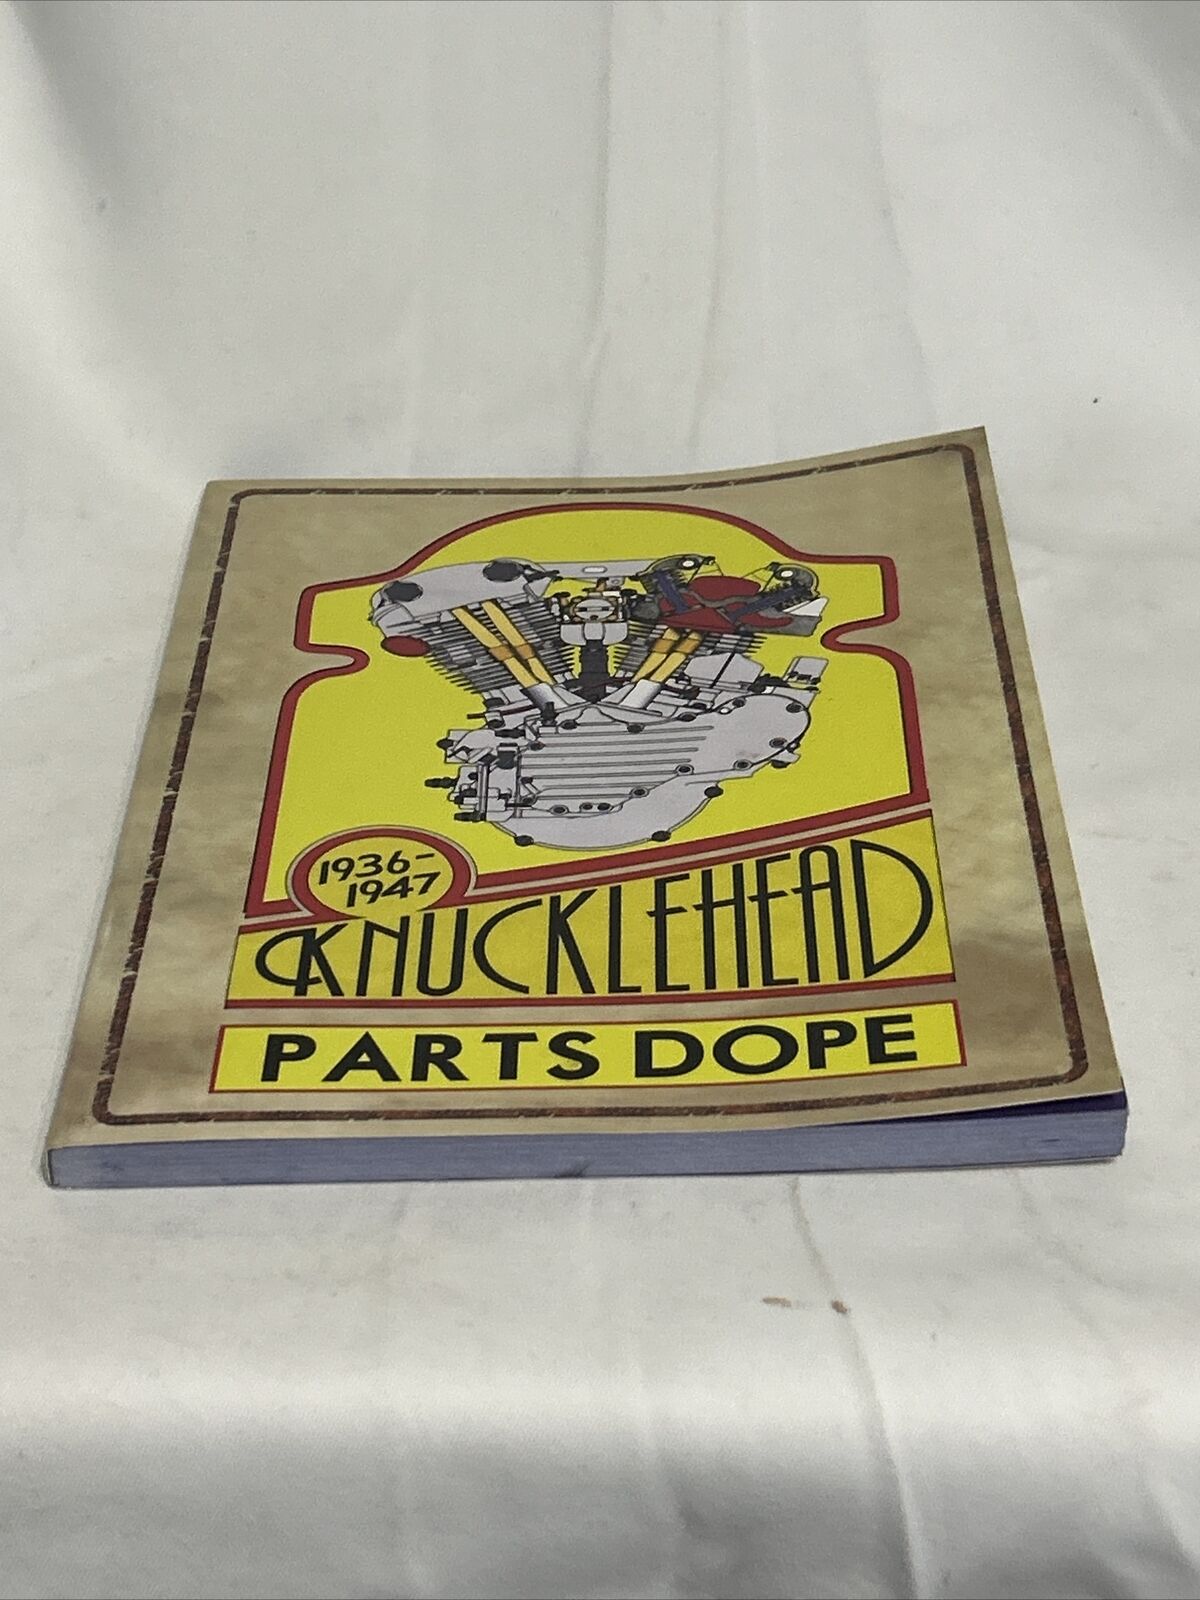 PARTS DOPE 208 page Reference Book for 1936 - 1947 Harley Knucklehead UL Models